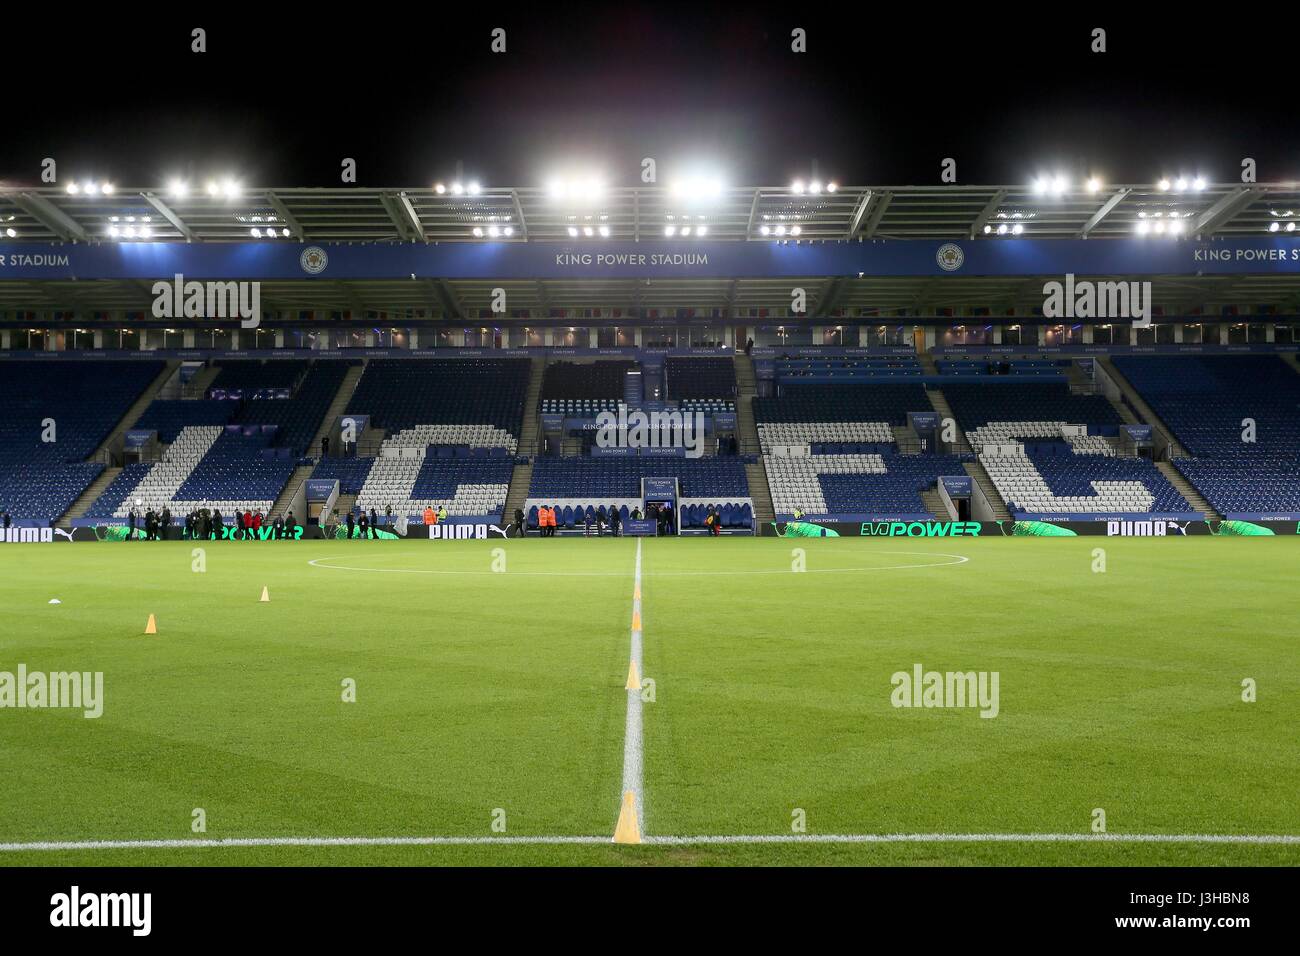 KING POWER STADIUM Leicester City FC KING POWER STADIUM LEICESTER ANGLETERRE 27 Février 2017 Banque D'Images